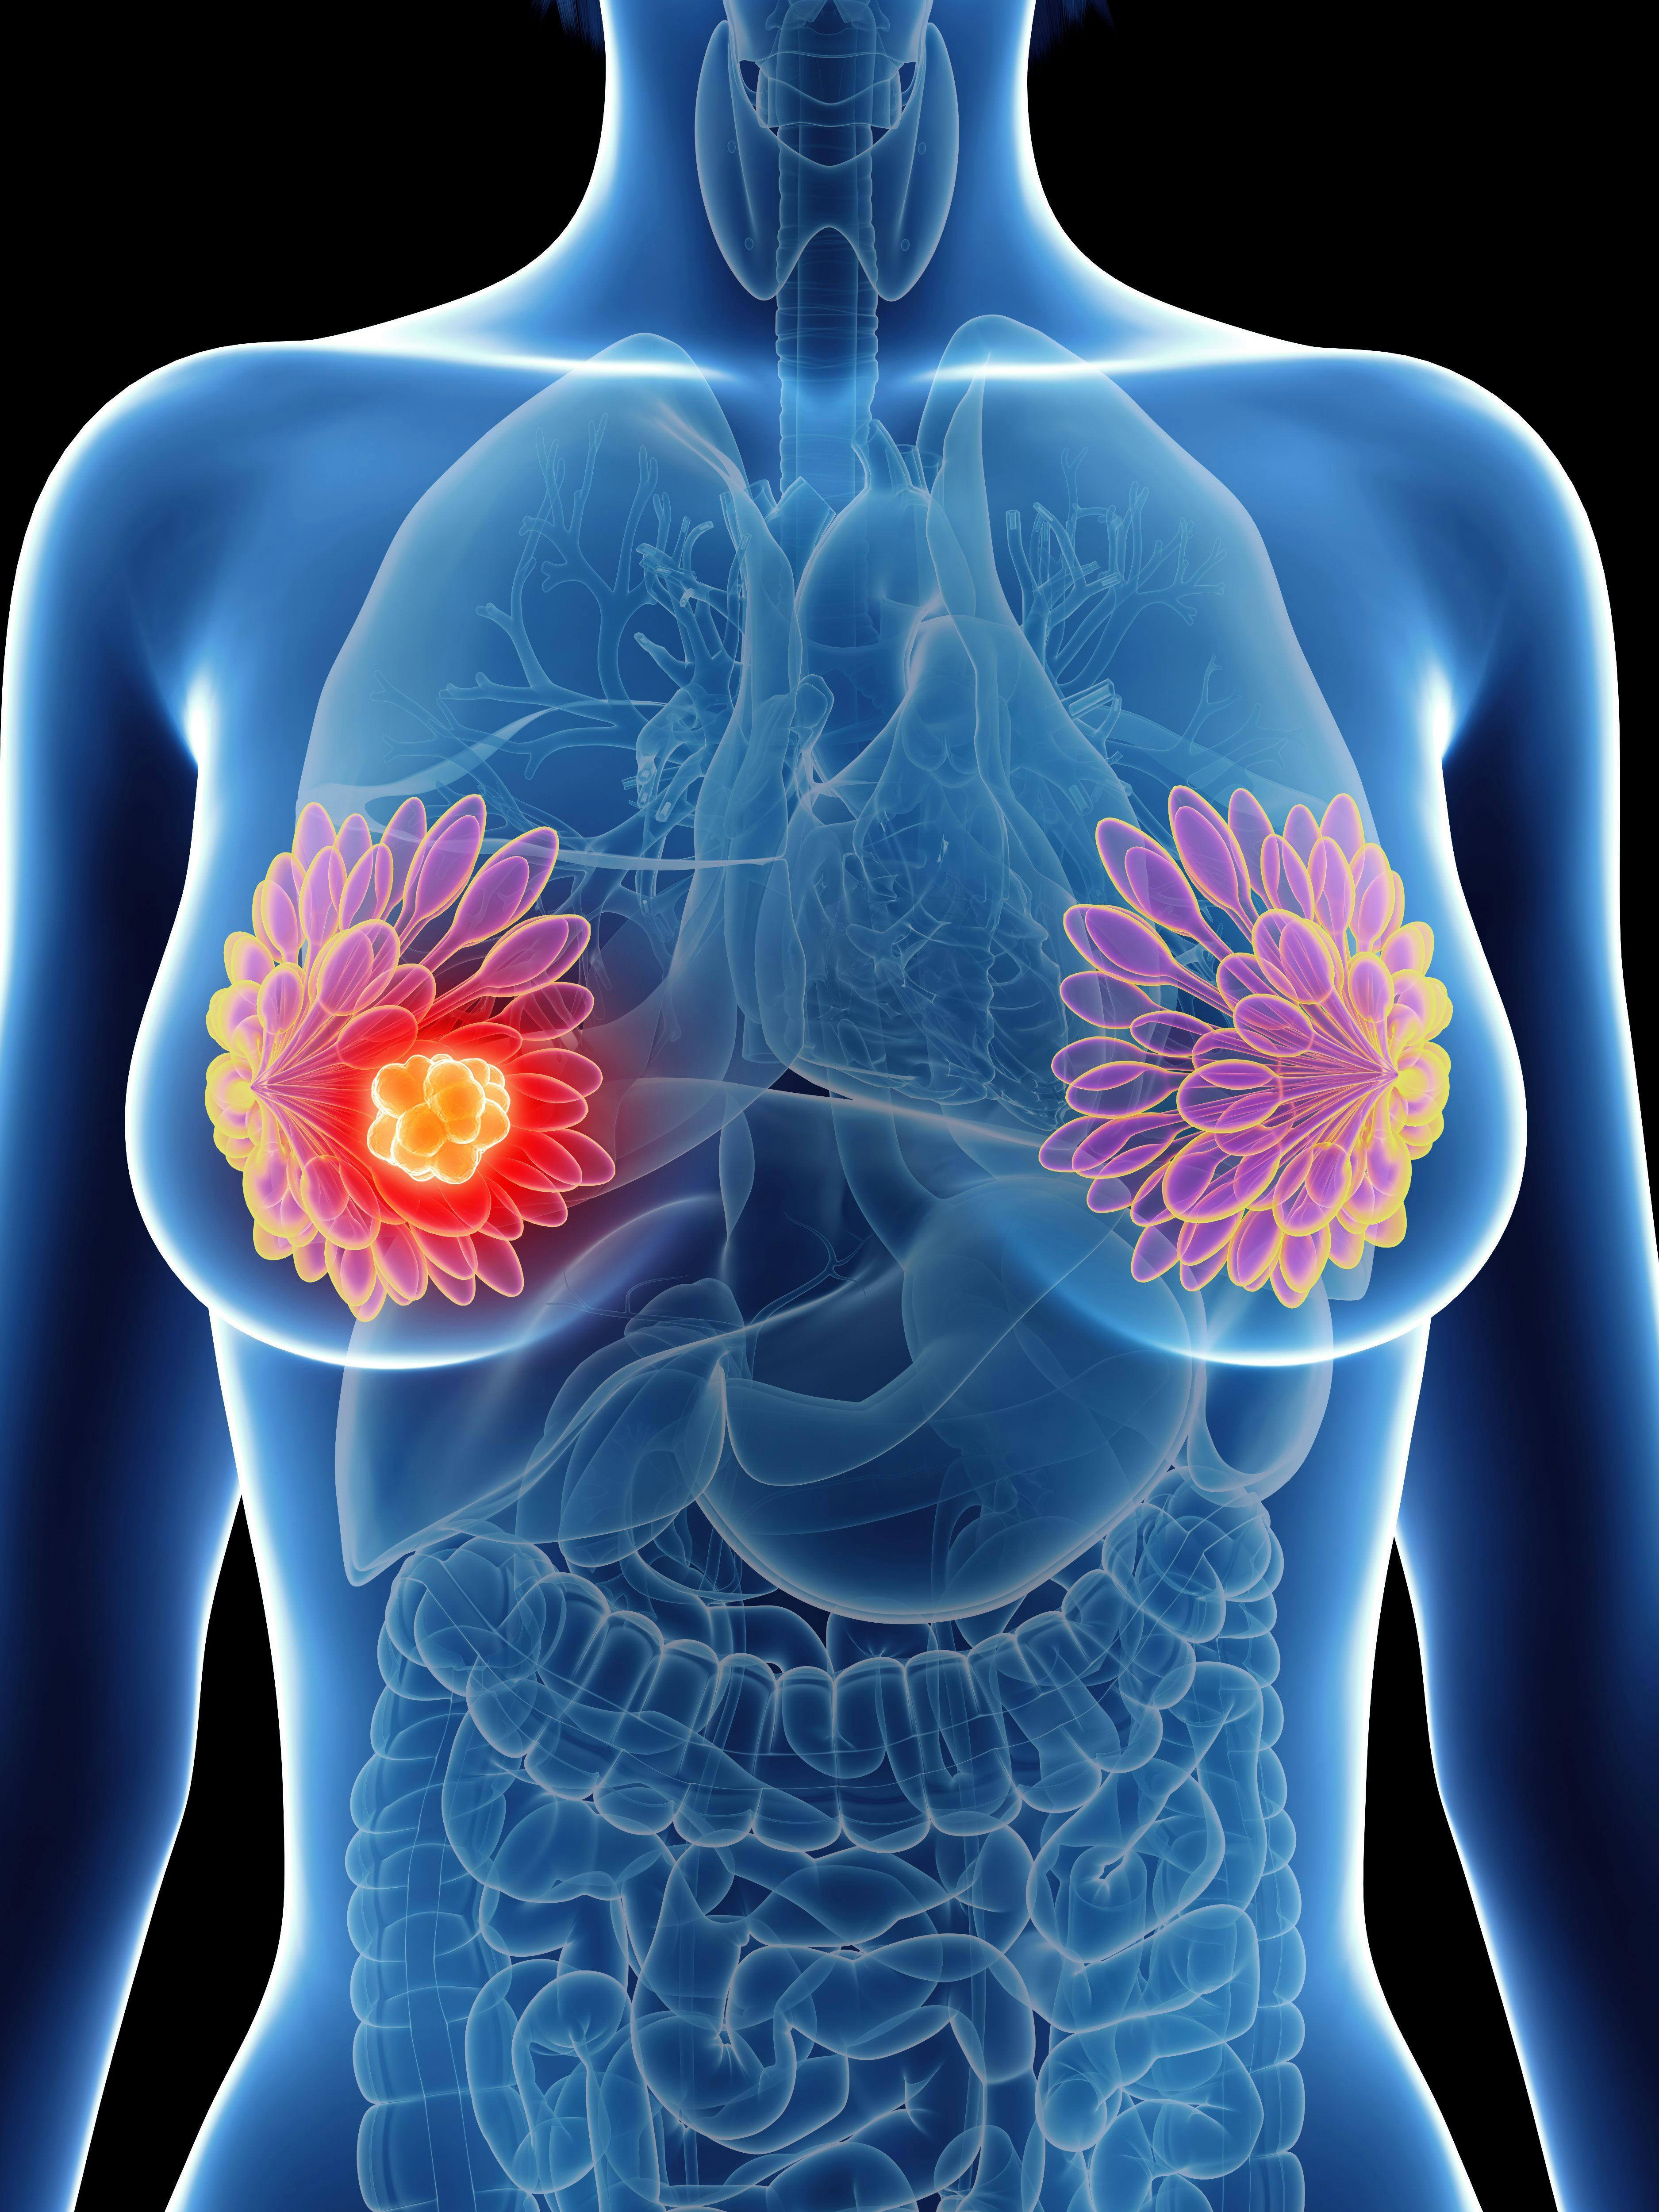 Praluzatamab Ravtansine Meets Primary End Point in HR+/HER2–Non-Amplified Breast Cancer